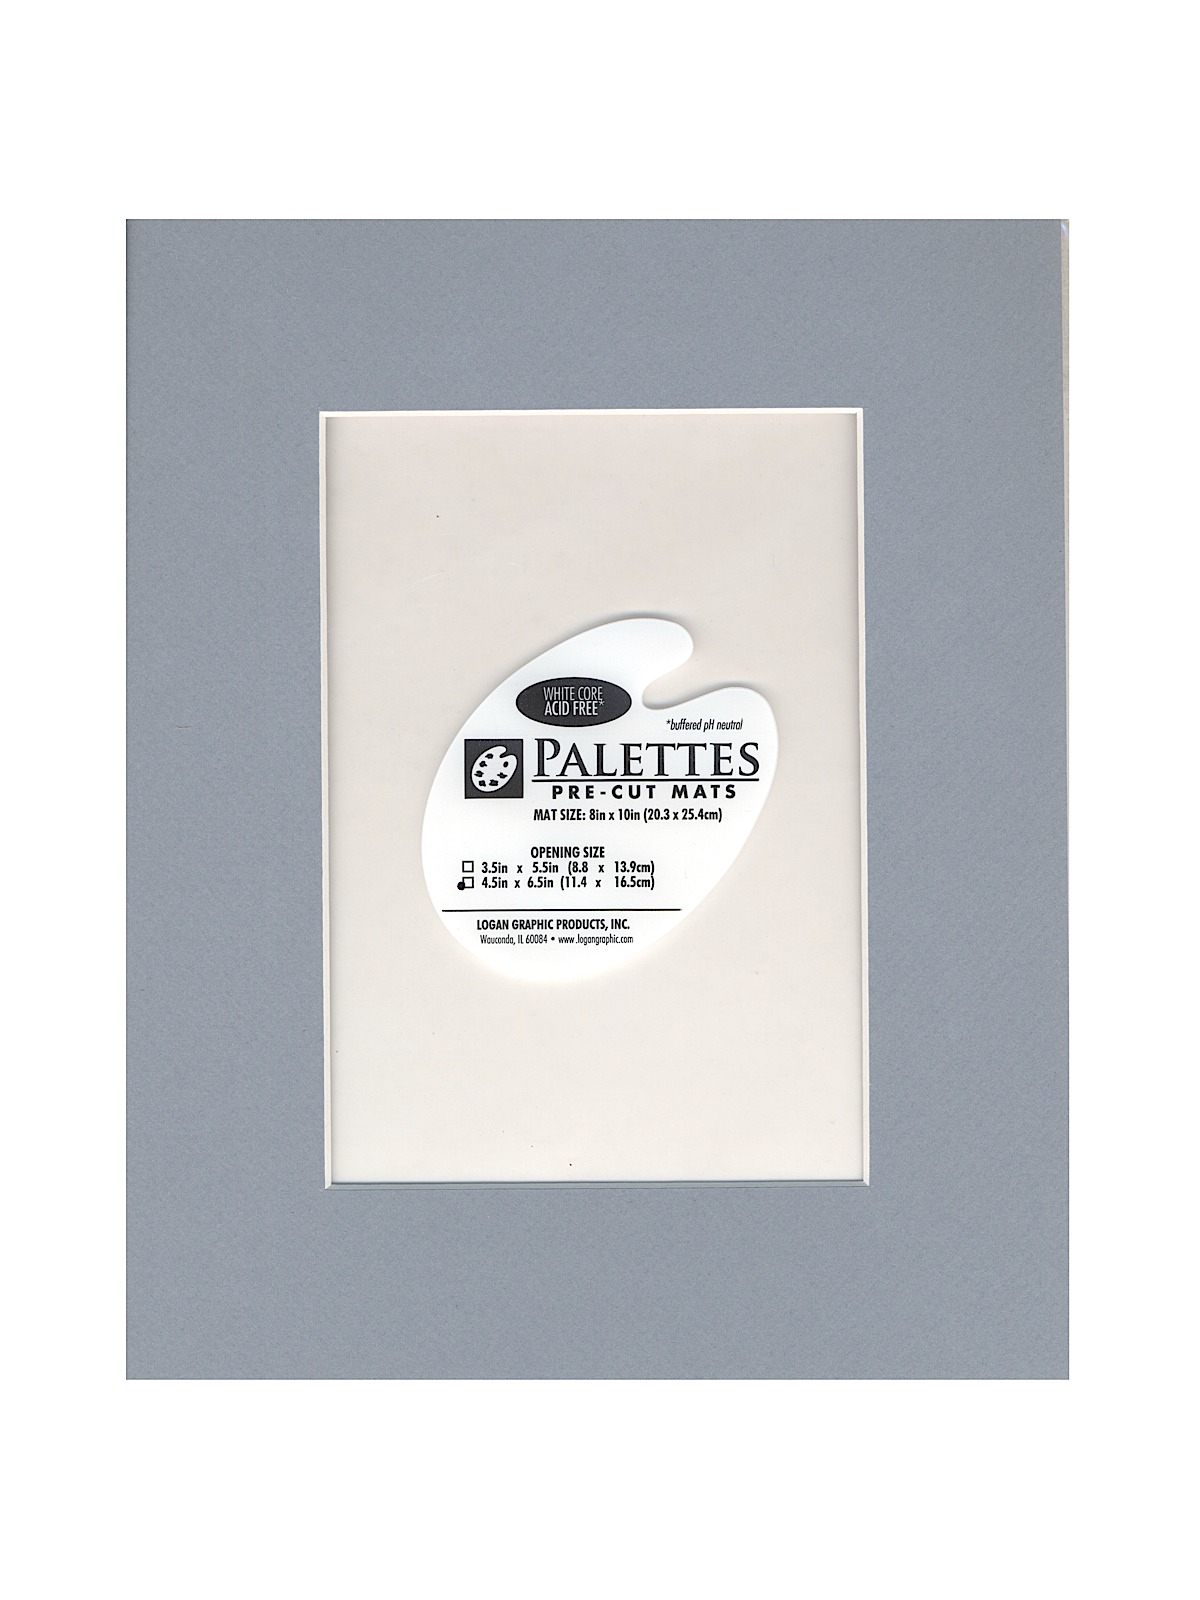 Palettes Pre-cut Mats Rectangle Wedgwood Blue 11 In. X 14 In.